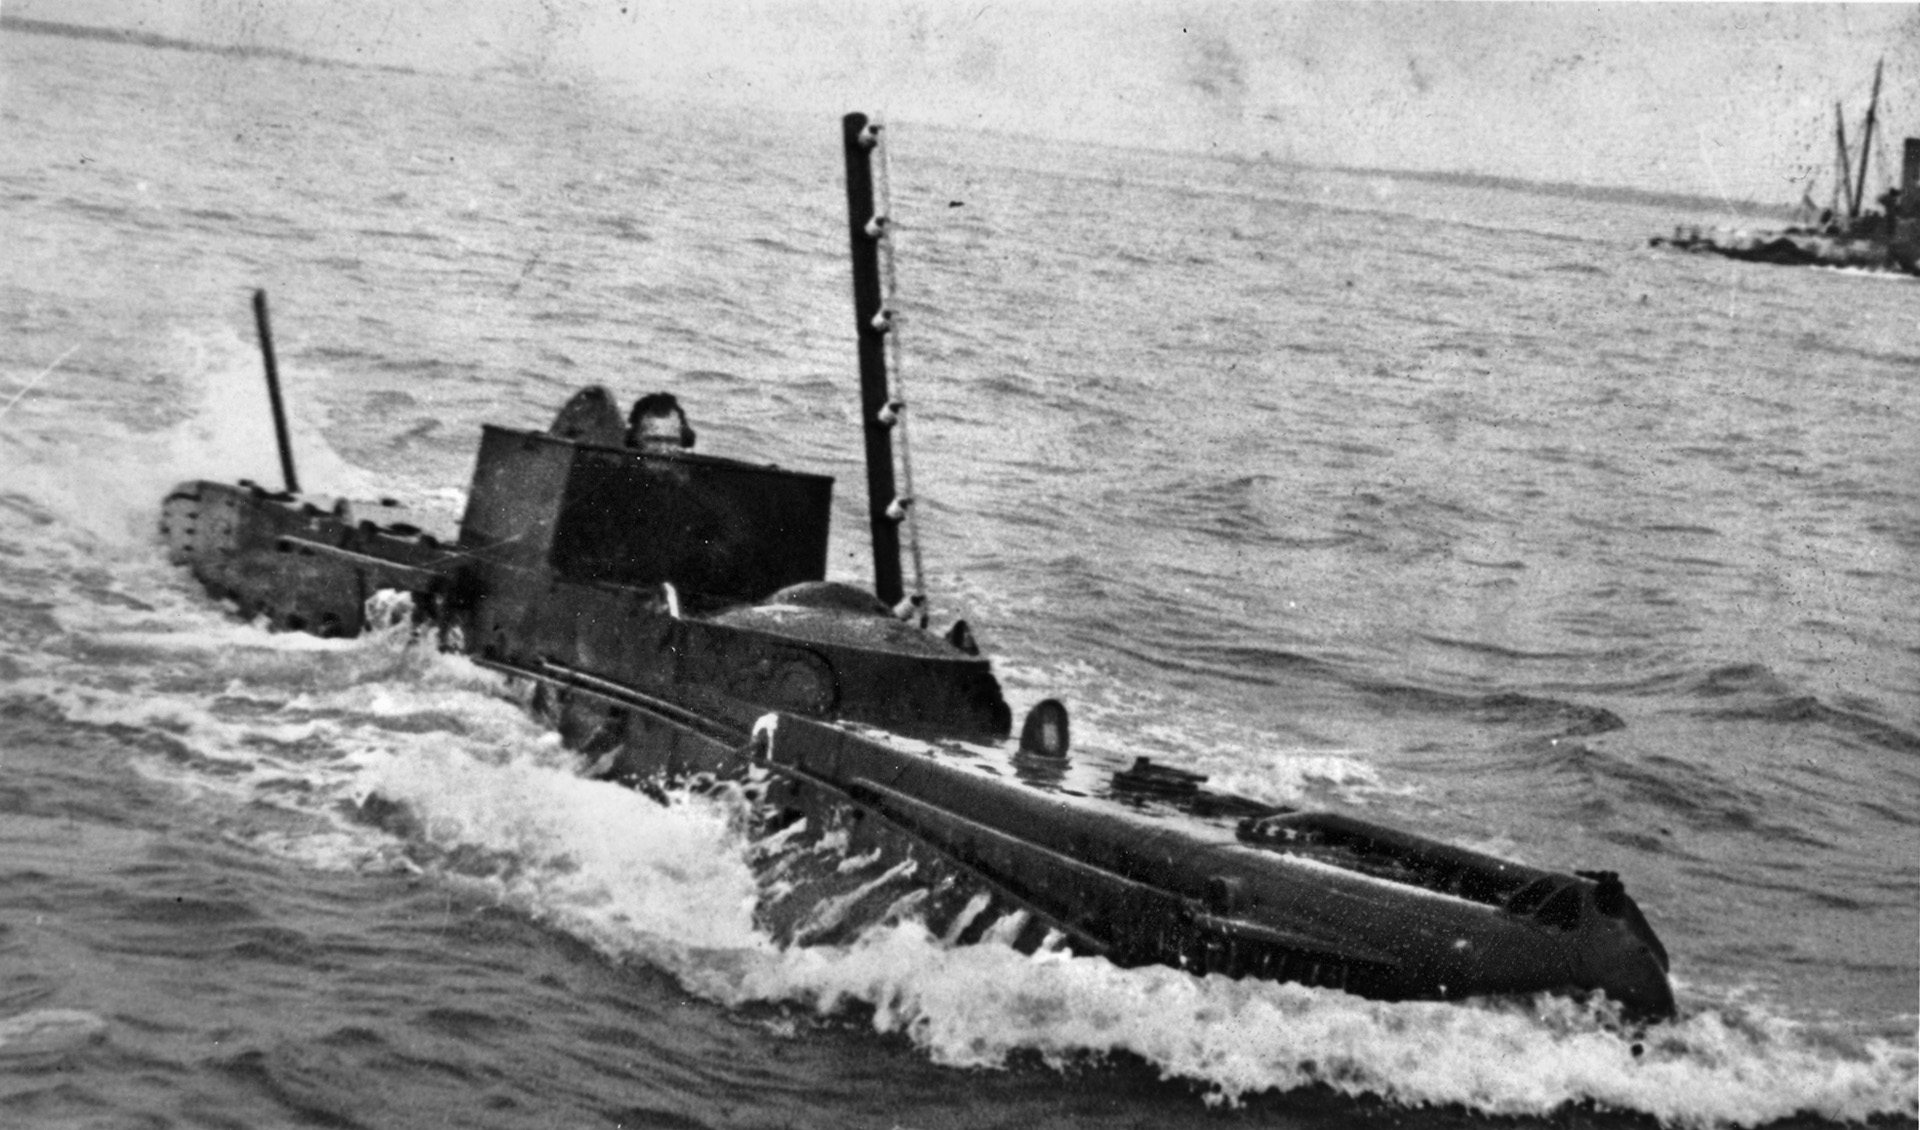 The British sent 10 X-craft midget submarines against the Tirpitz in September 1943. Two succeeded in depositing mines that damaged the battleship. 